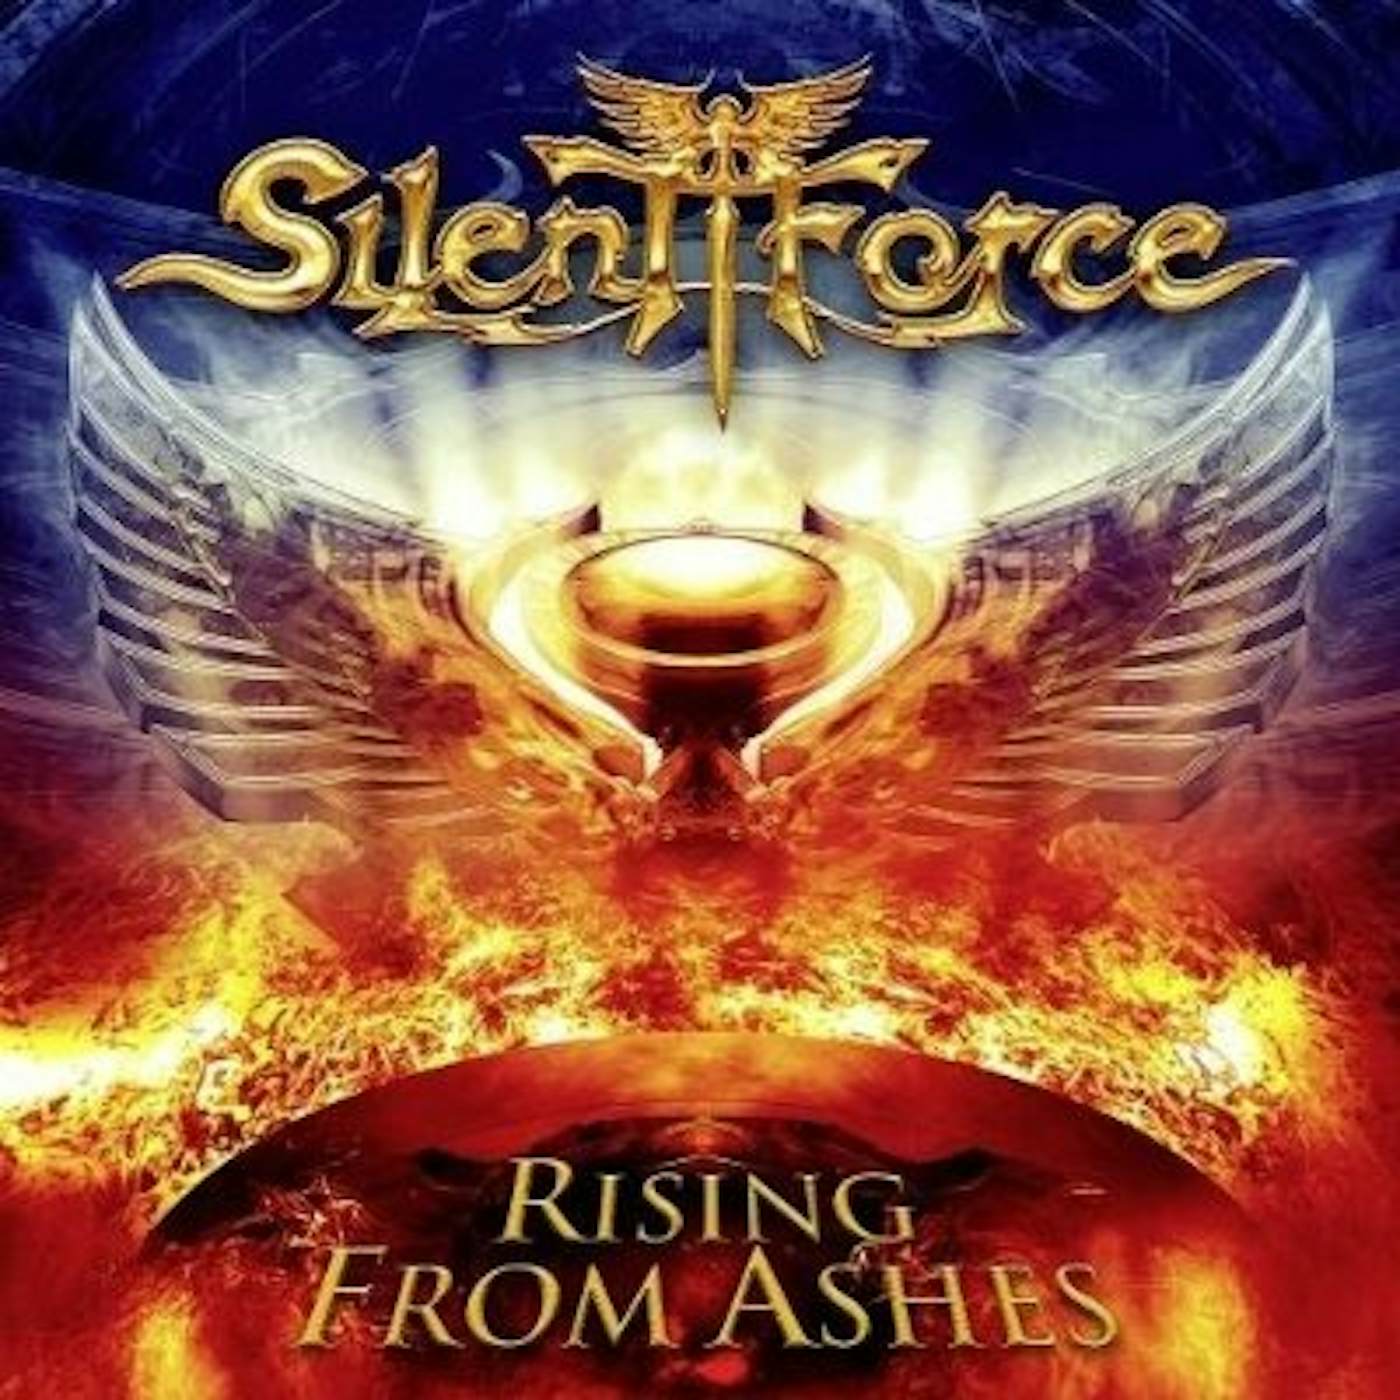 Silent Force RISING FROM ASHES CD